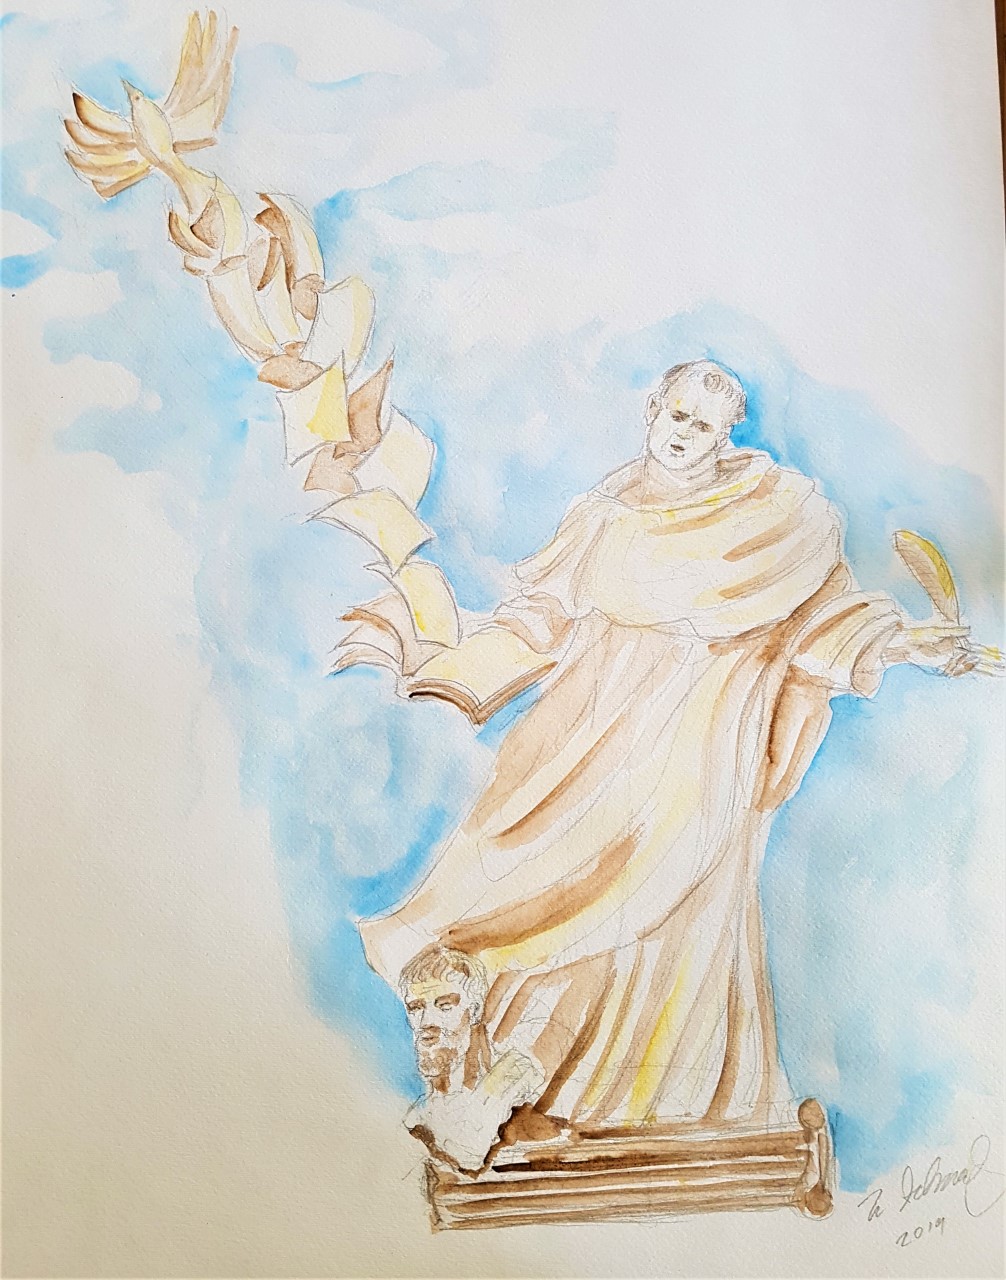 Sketch of the sculpture of Saint Thomas Aquinas that will be installed outside the chapel.